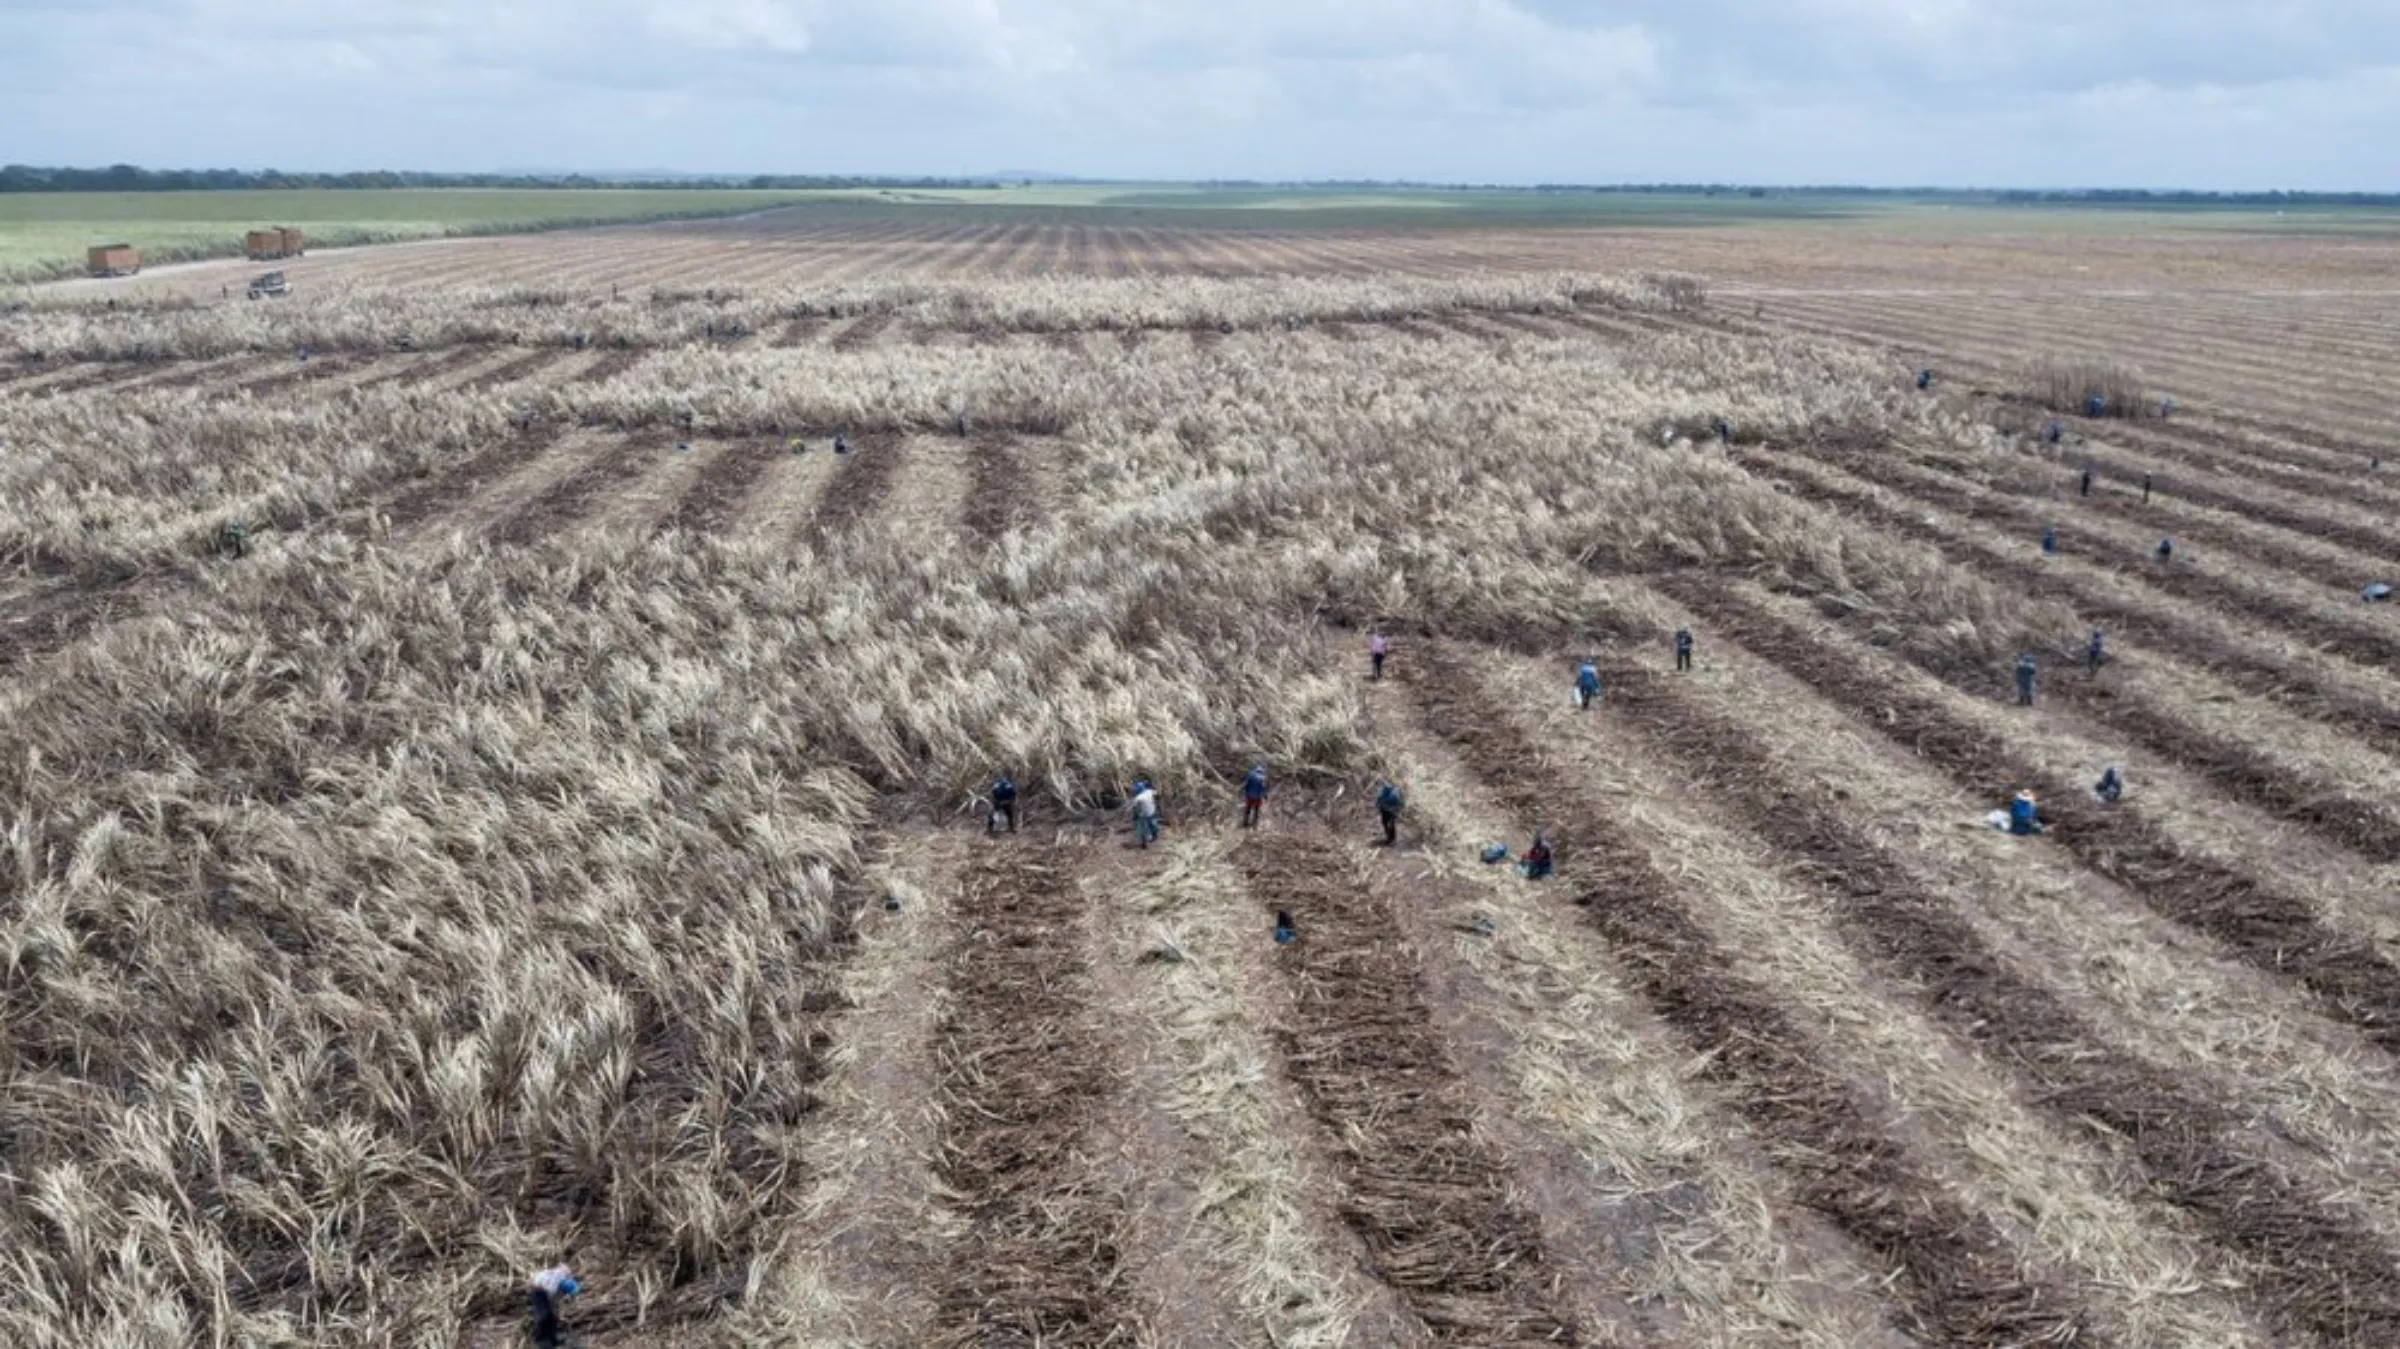 Sugarcane is harvested by workers in a plantation near Maceio, Brazil, on September 27, 2021